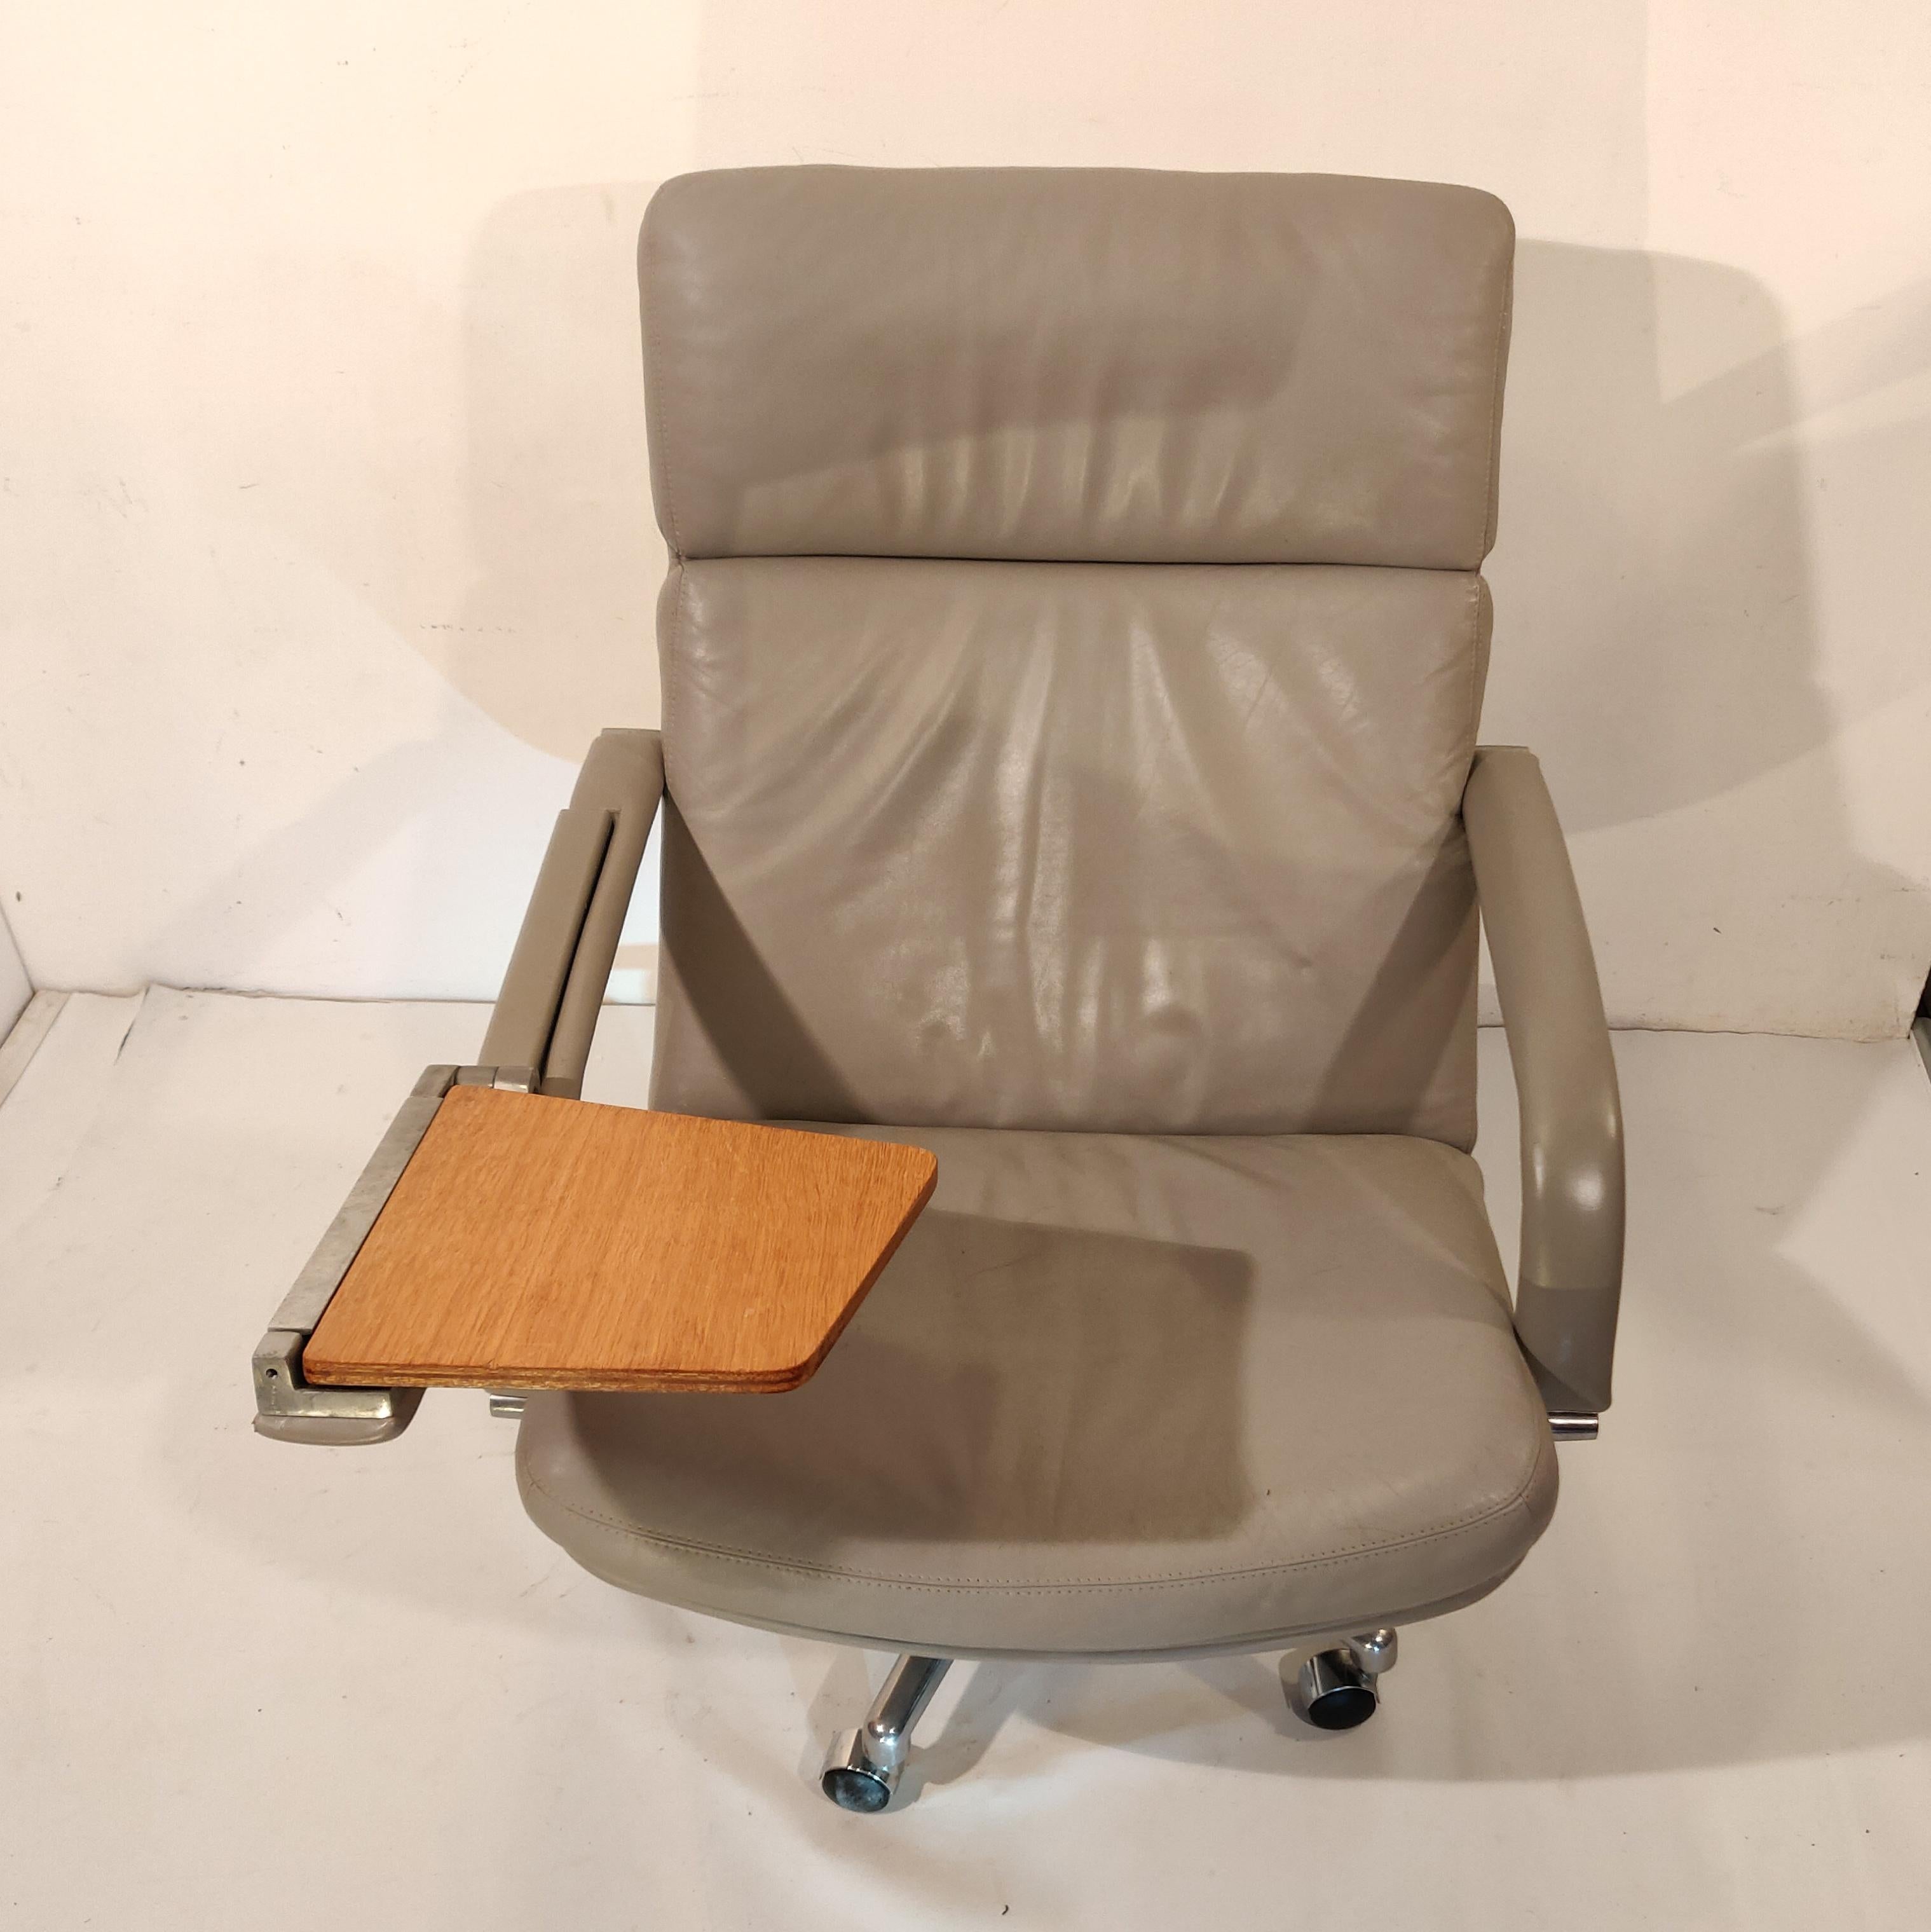 Leather Swivel Chair with Wooden Writing Board by Geoffrey Harcourt, 1970s For Sale 5